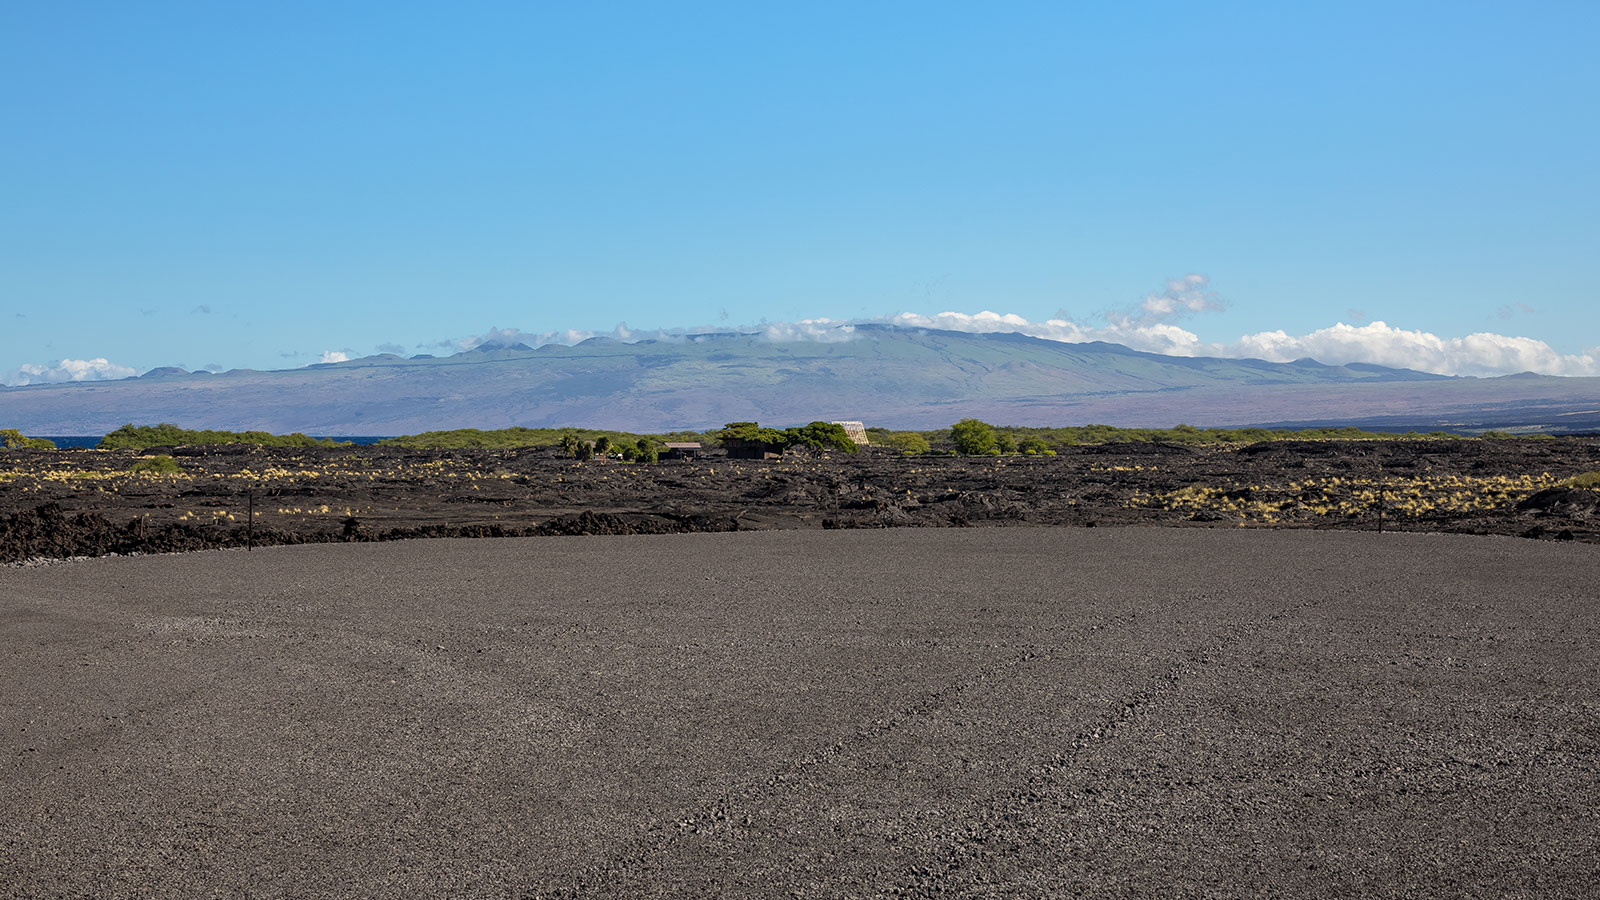 The dramatic landscape watched over by Mauna Kea